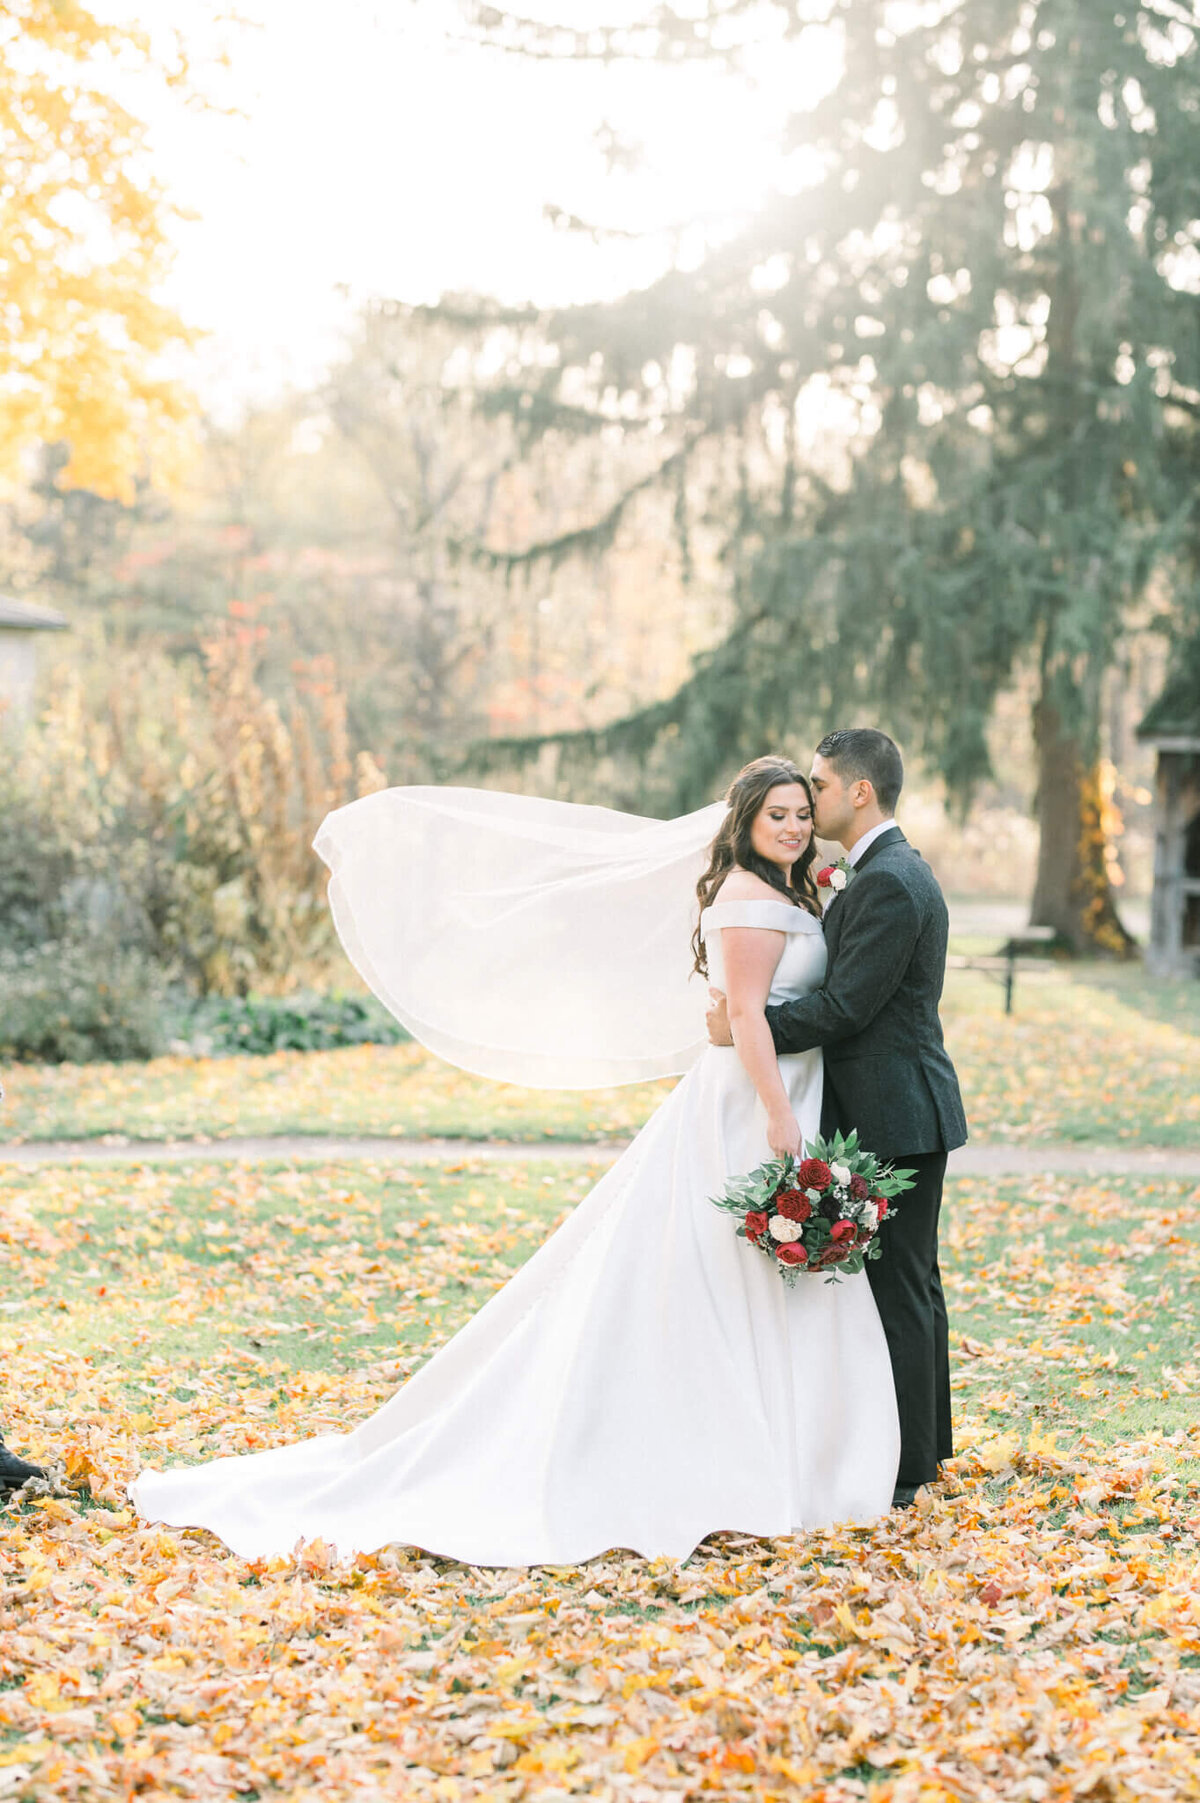 Bride and groom standing in the middle of fallen leaves as the wind blows  brides veil. Captured by Niagara wedding photographer Kristine Marie Photography